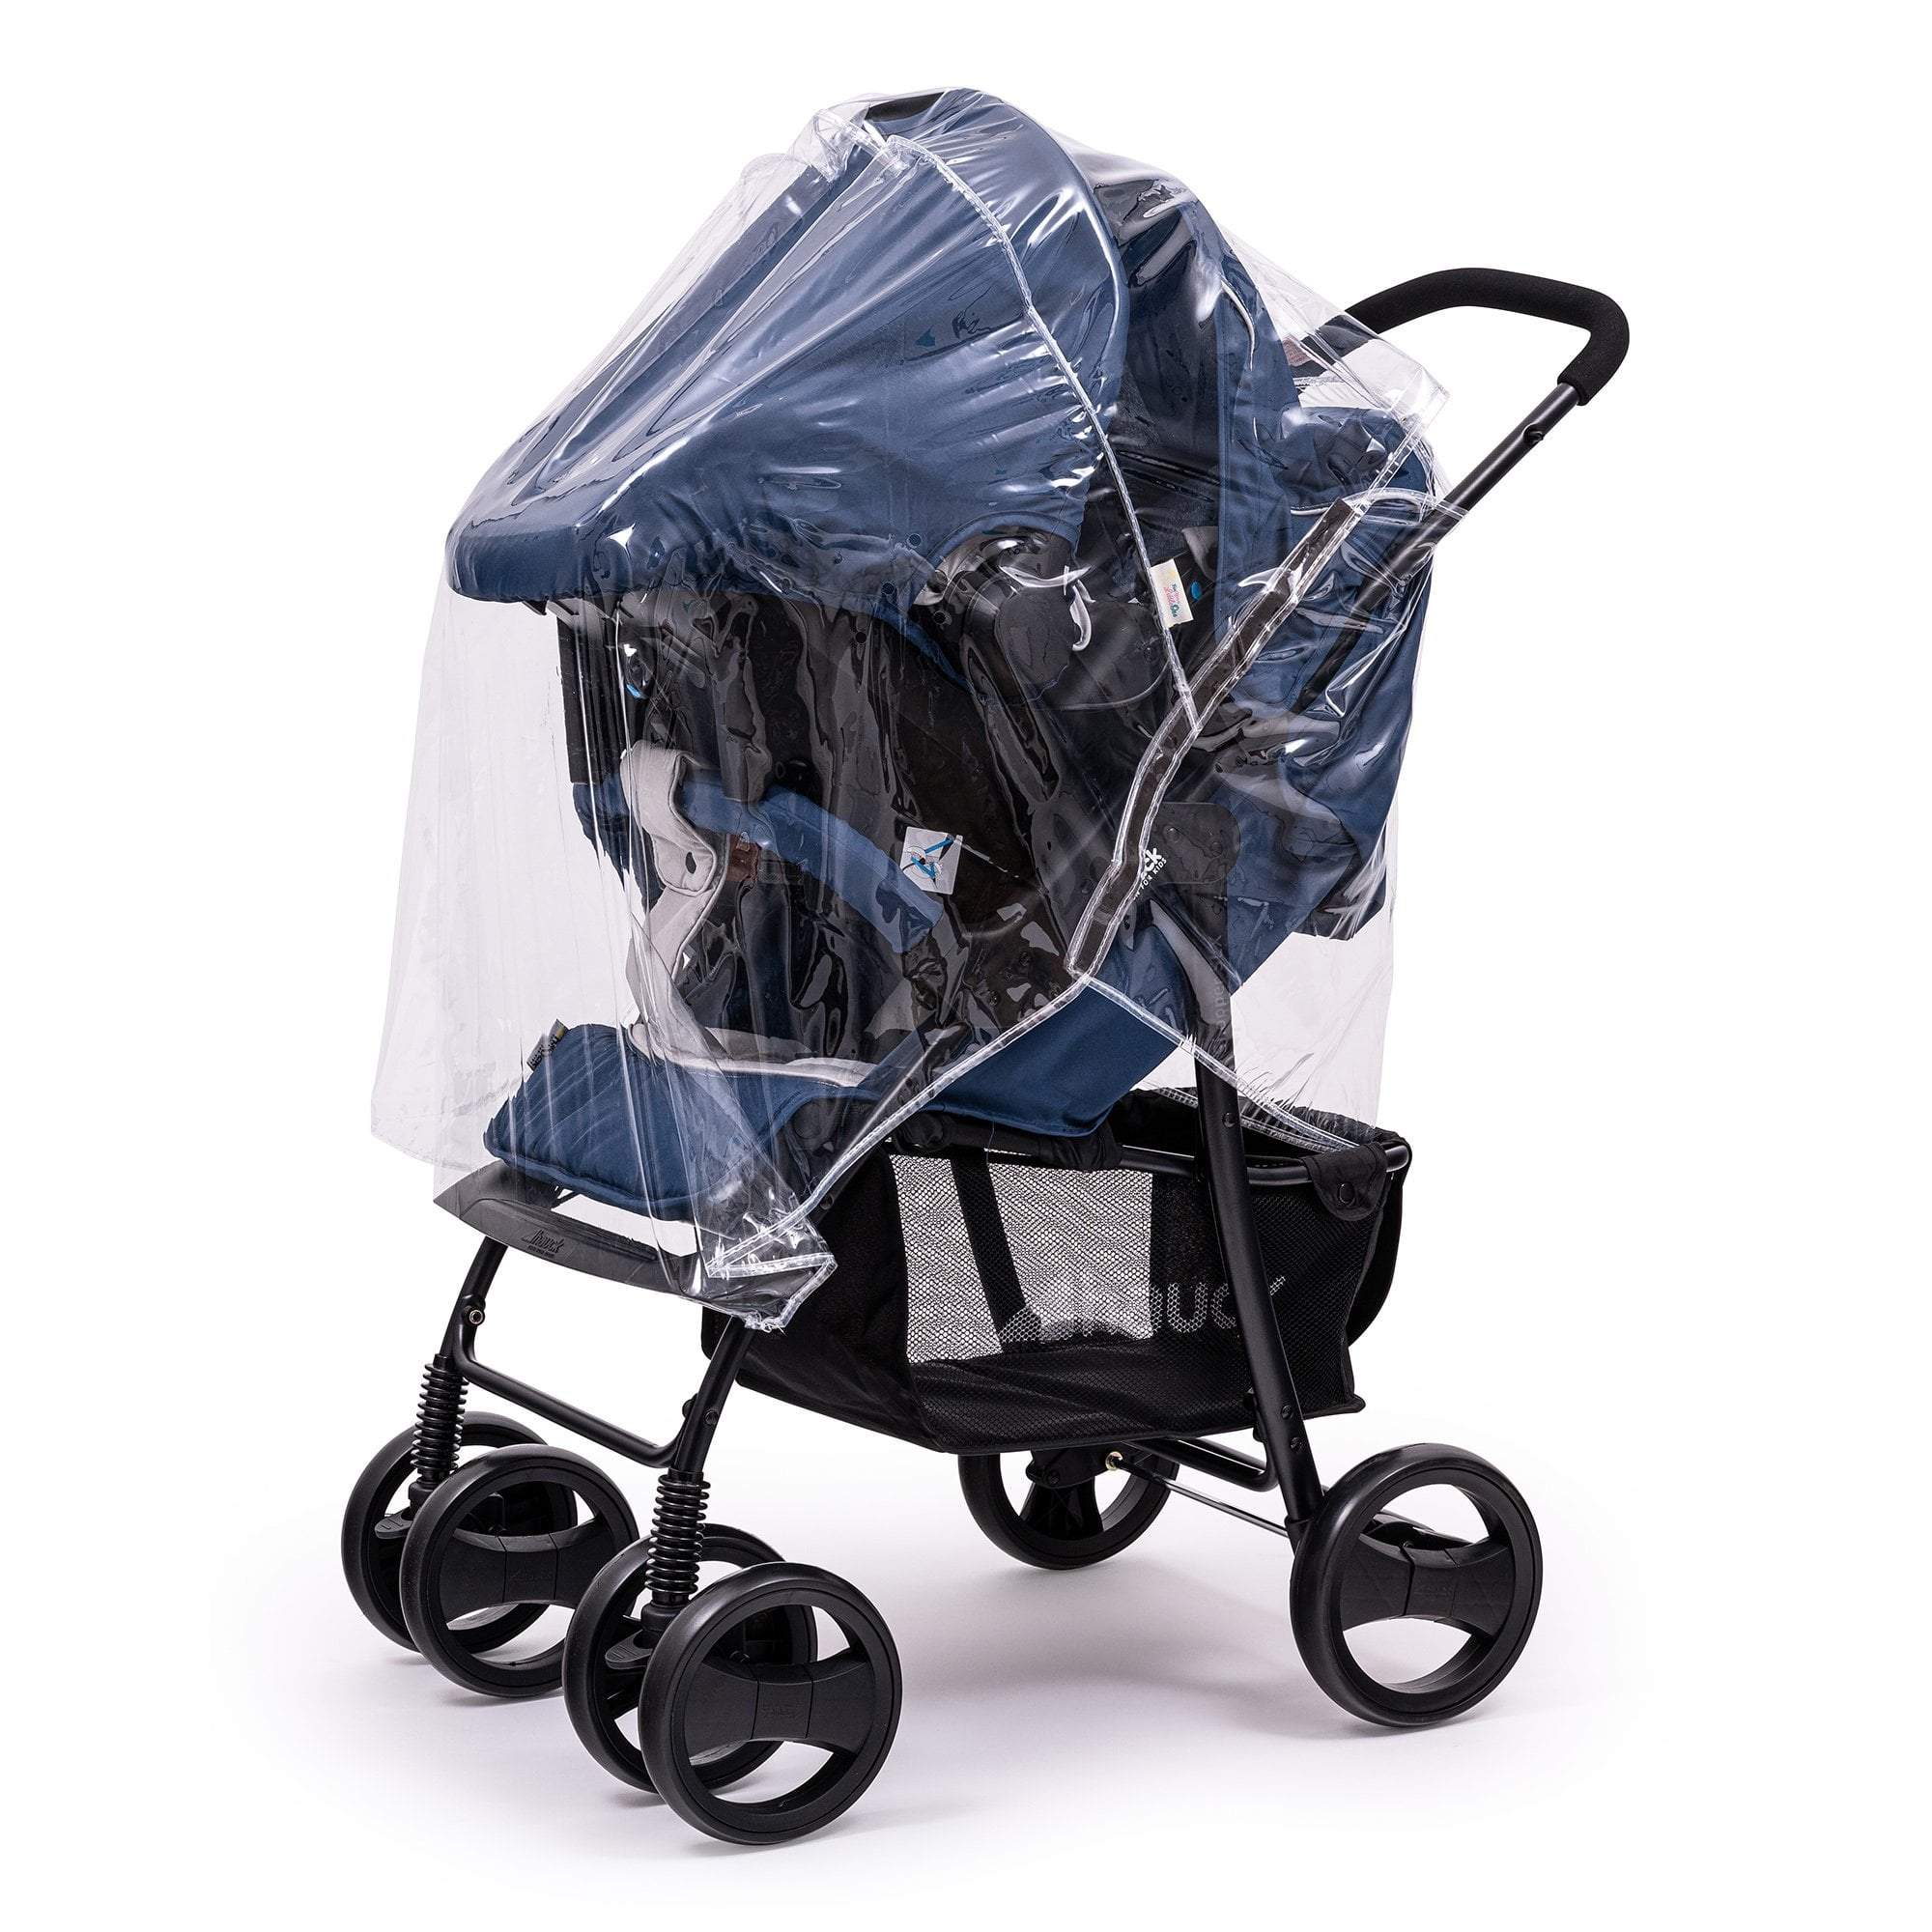 Travel System Raincover Compatible with Joie - Fits All Models - For Your Little One